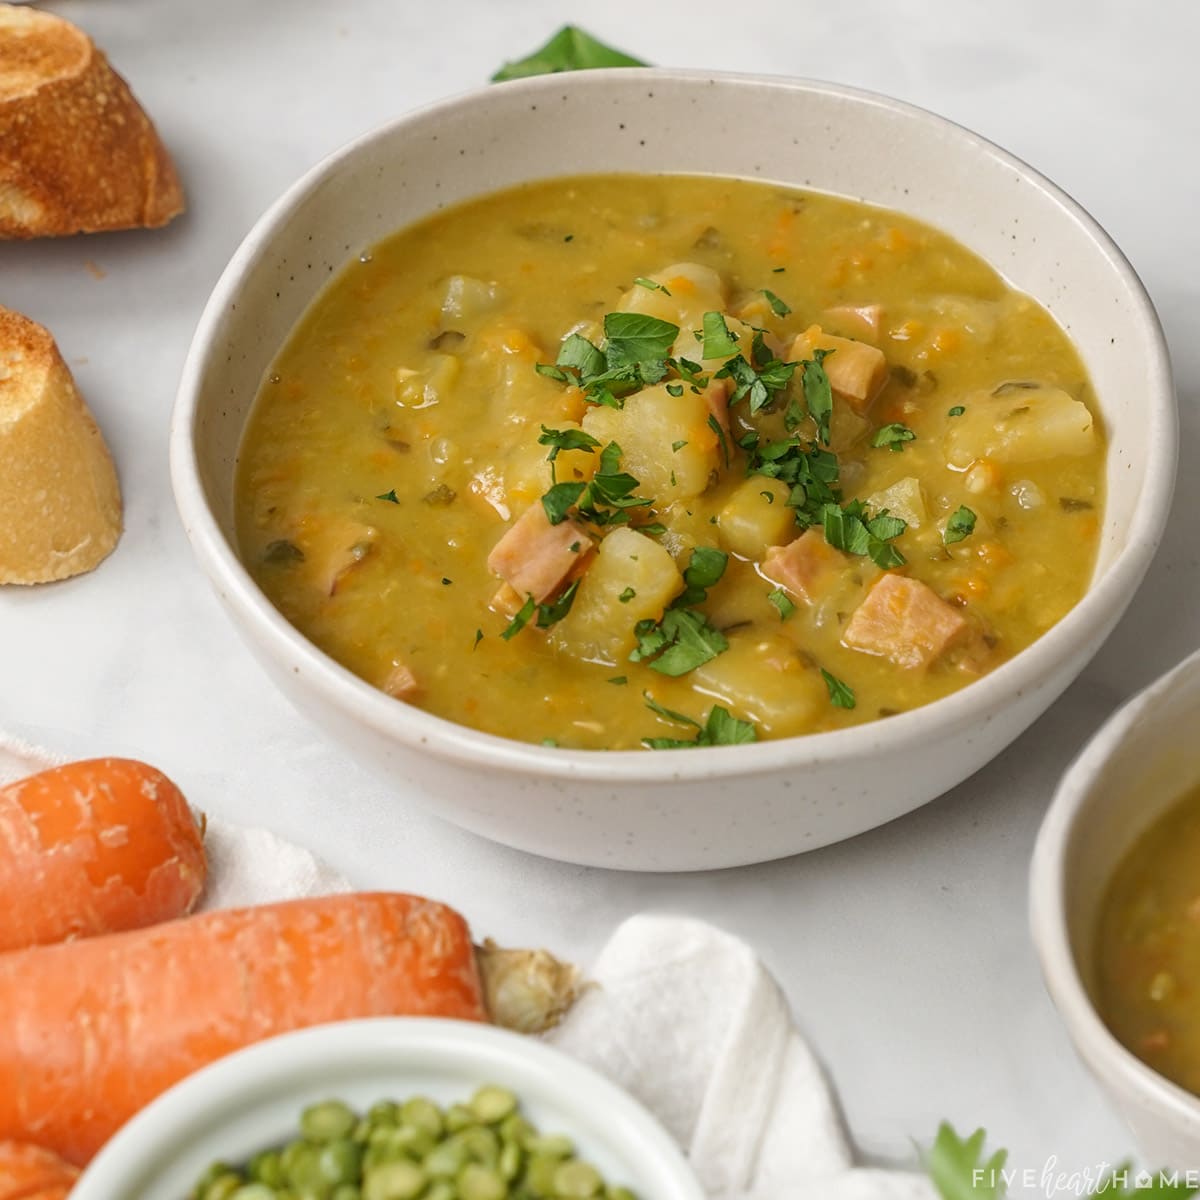 https://www.fivehearthome.com/wp-content/uploads/2022/10/Crockpot-Split-Pea-Soup-Recipe-by-Five-Heart-Home_1200pxFeatured.jpg